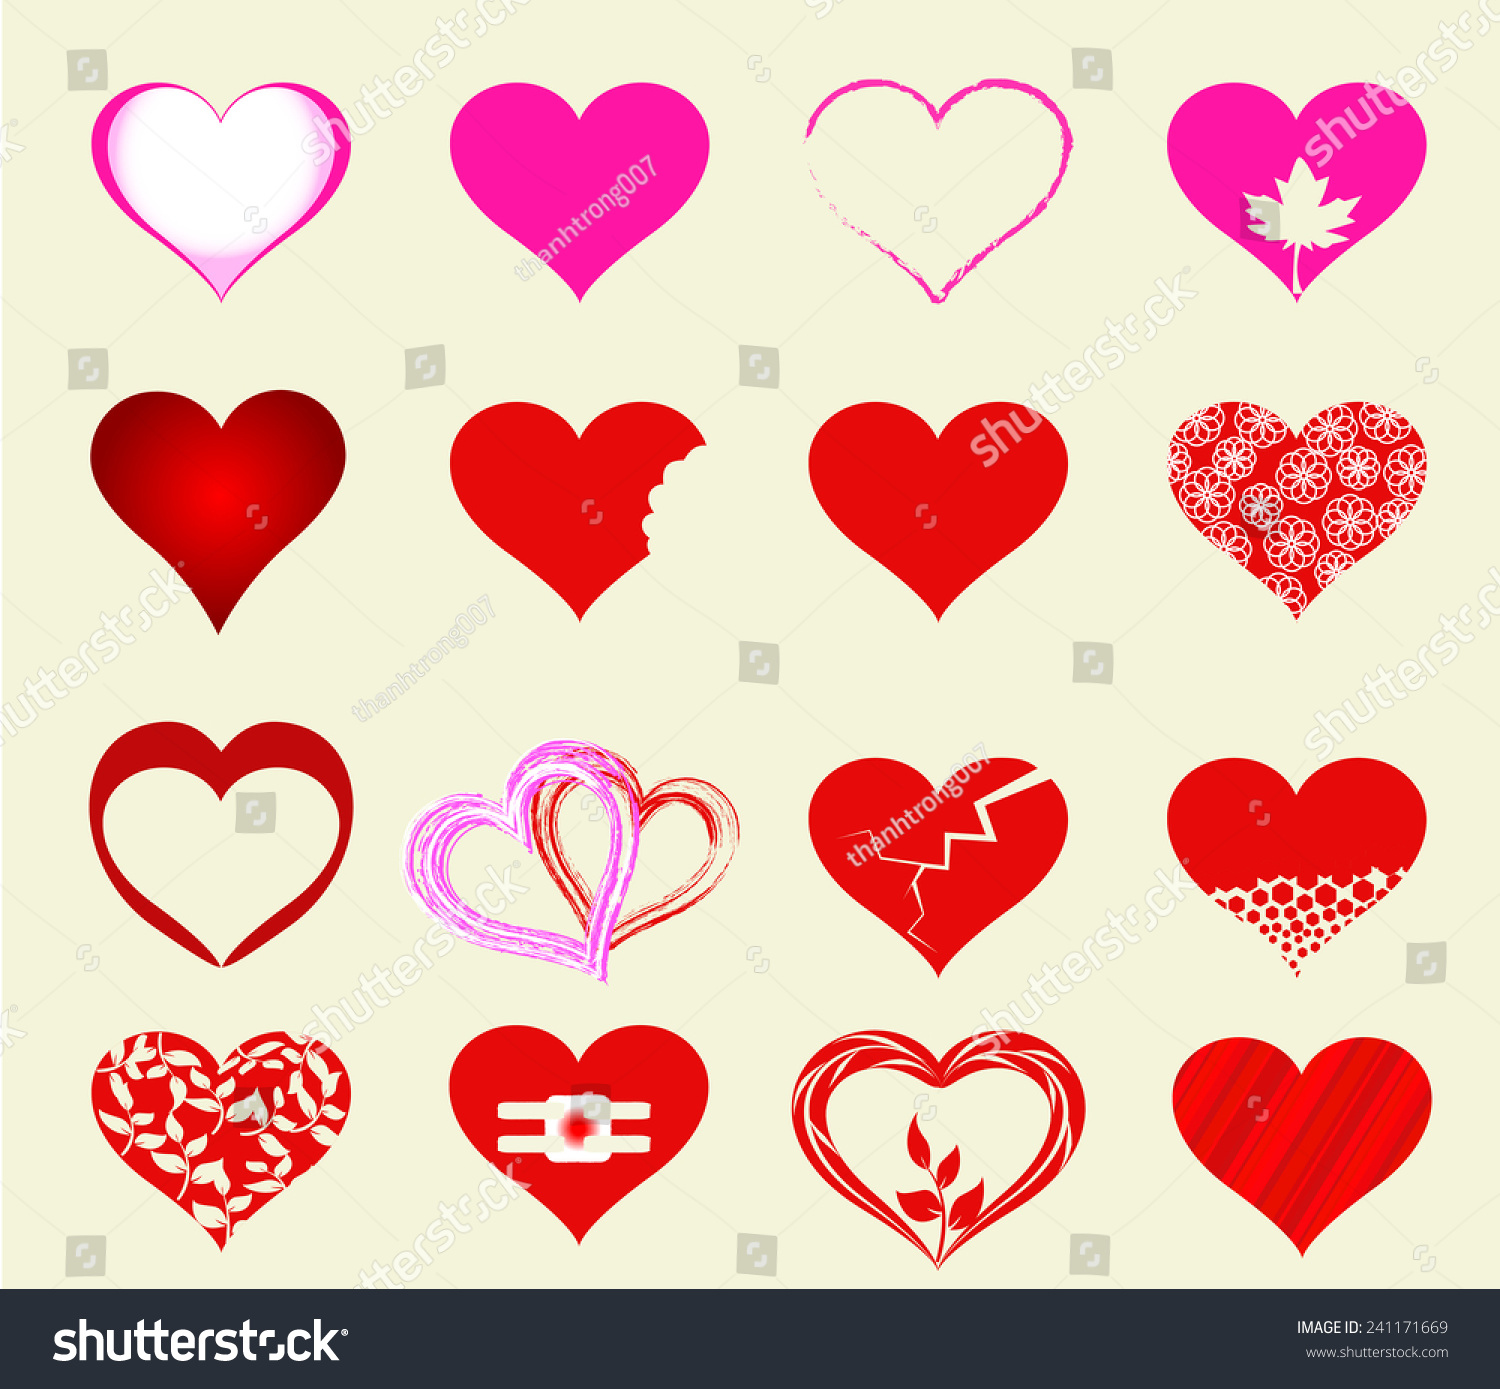 Happy Valentines Day Cards Hearts Stock Vector Royalty Free 241171669 Shutterstock